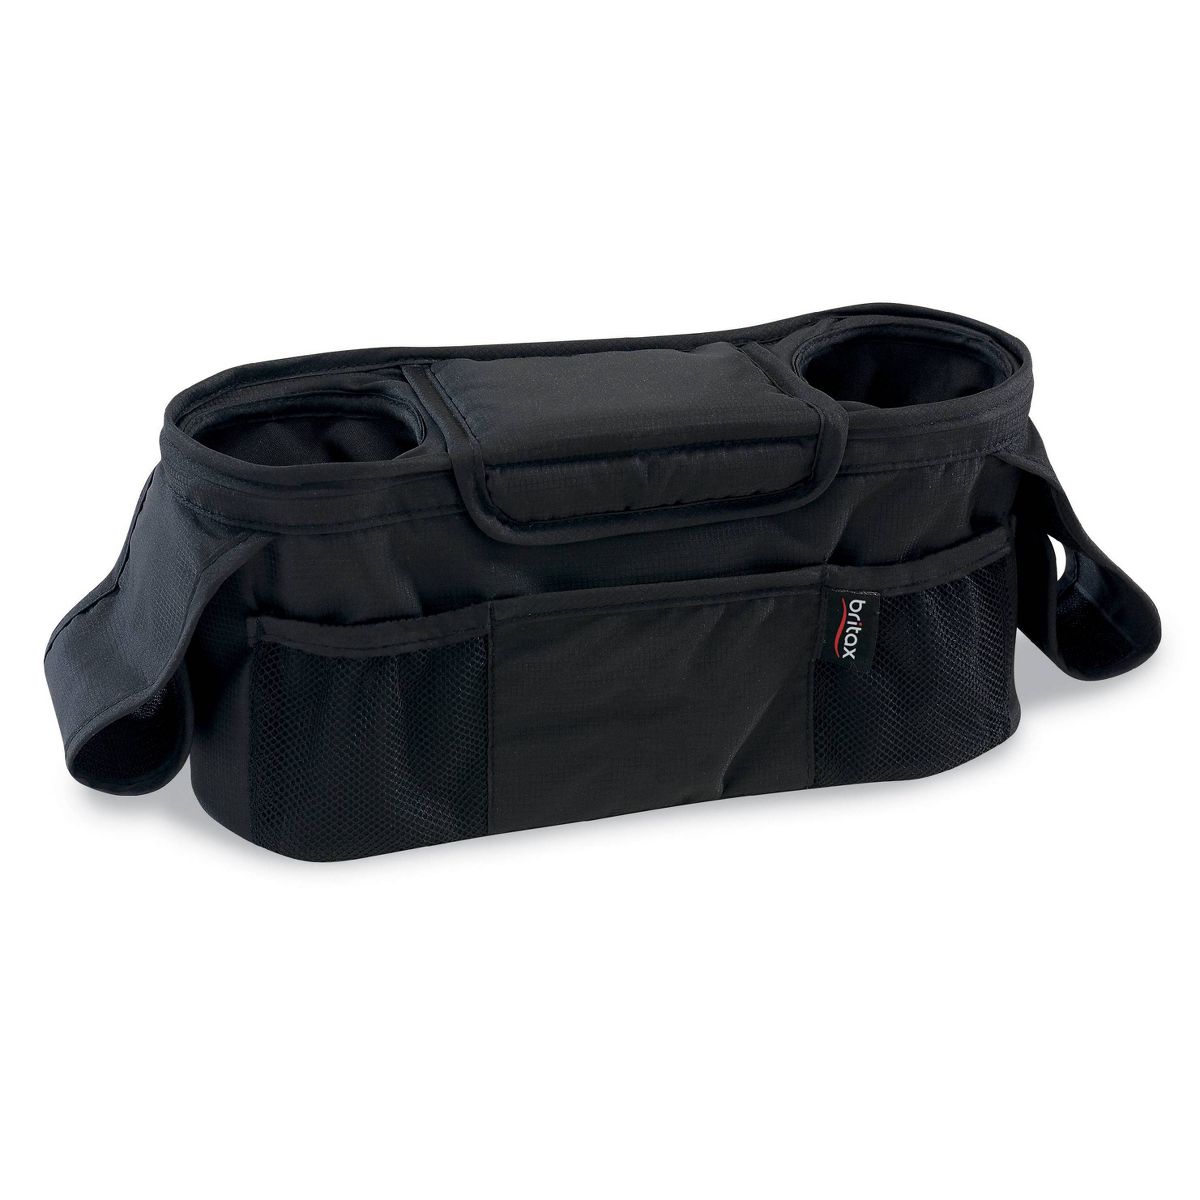 New Britax Stroller Organizer with Insulated Cup Holders